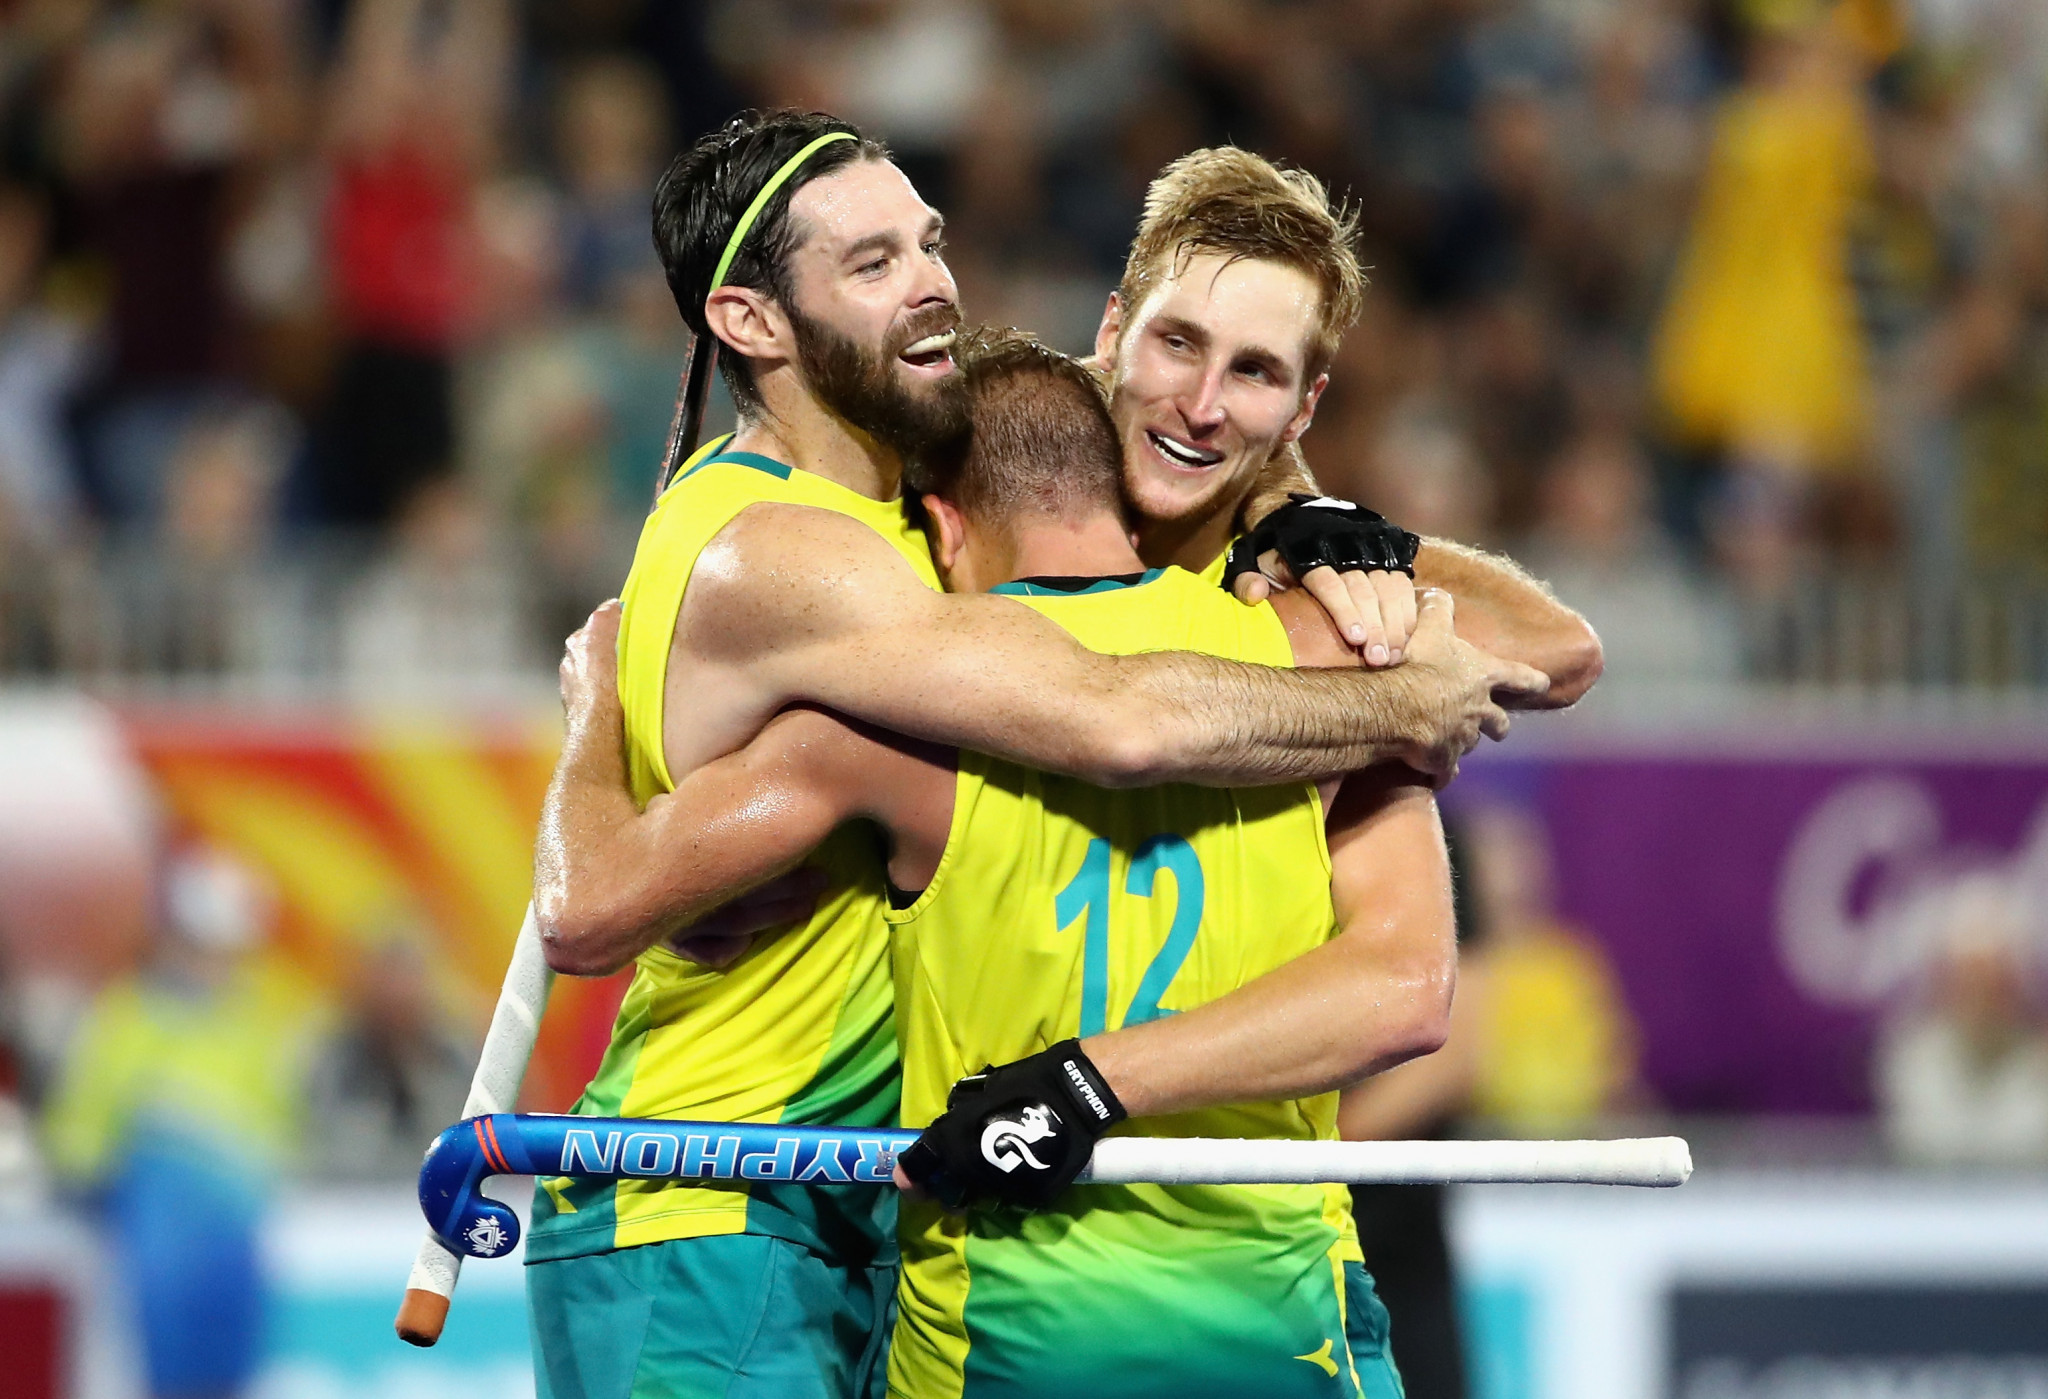 Australia are aiming to win a seventh straight men's Commonwealth Games hockey gold at Birmingham 2022 ©Getty Images